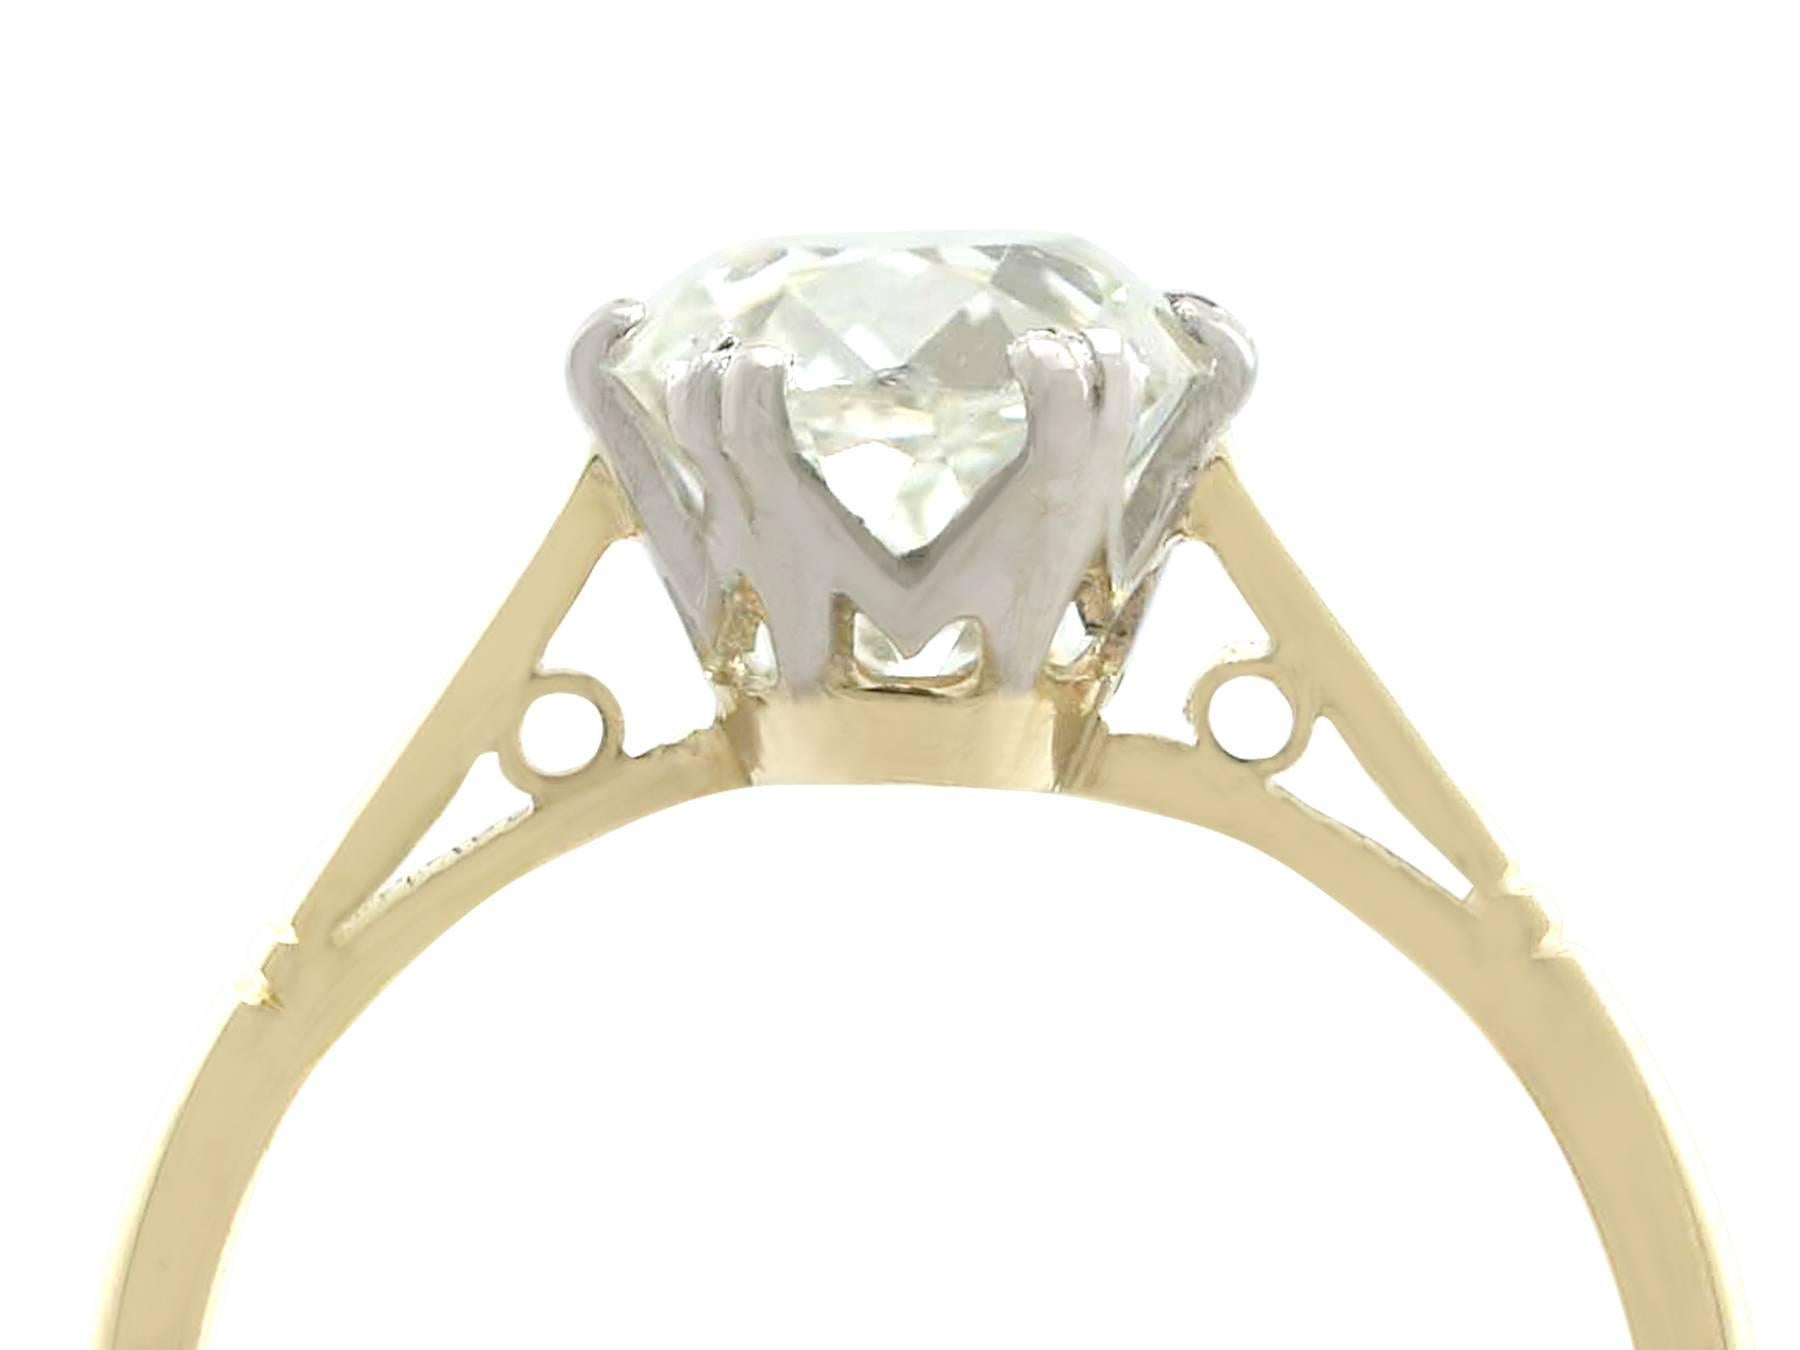 A stunning, fine and impressive 2.08 carat diamond and 18 karat yellow gold, 18 karat white gold set solitaire ring; part of our diverse engagement ring collections

This stunning, fine and impressive antique 1920's engagement ring has been crafted